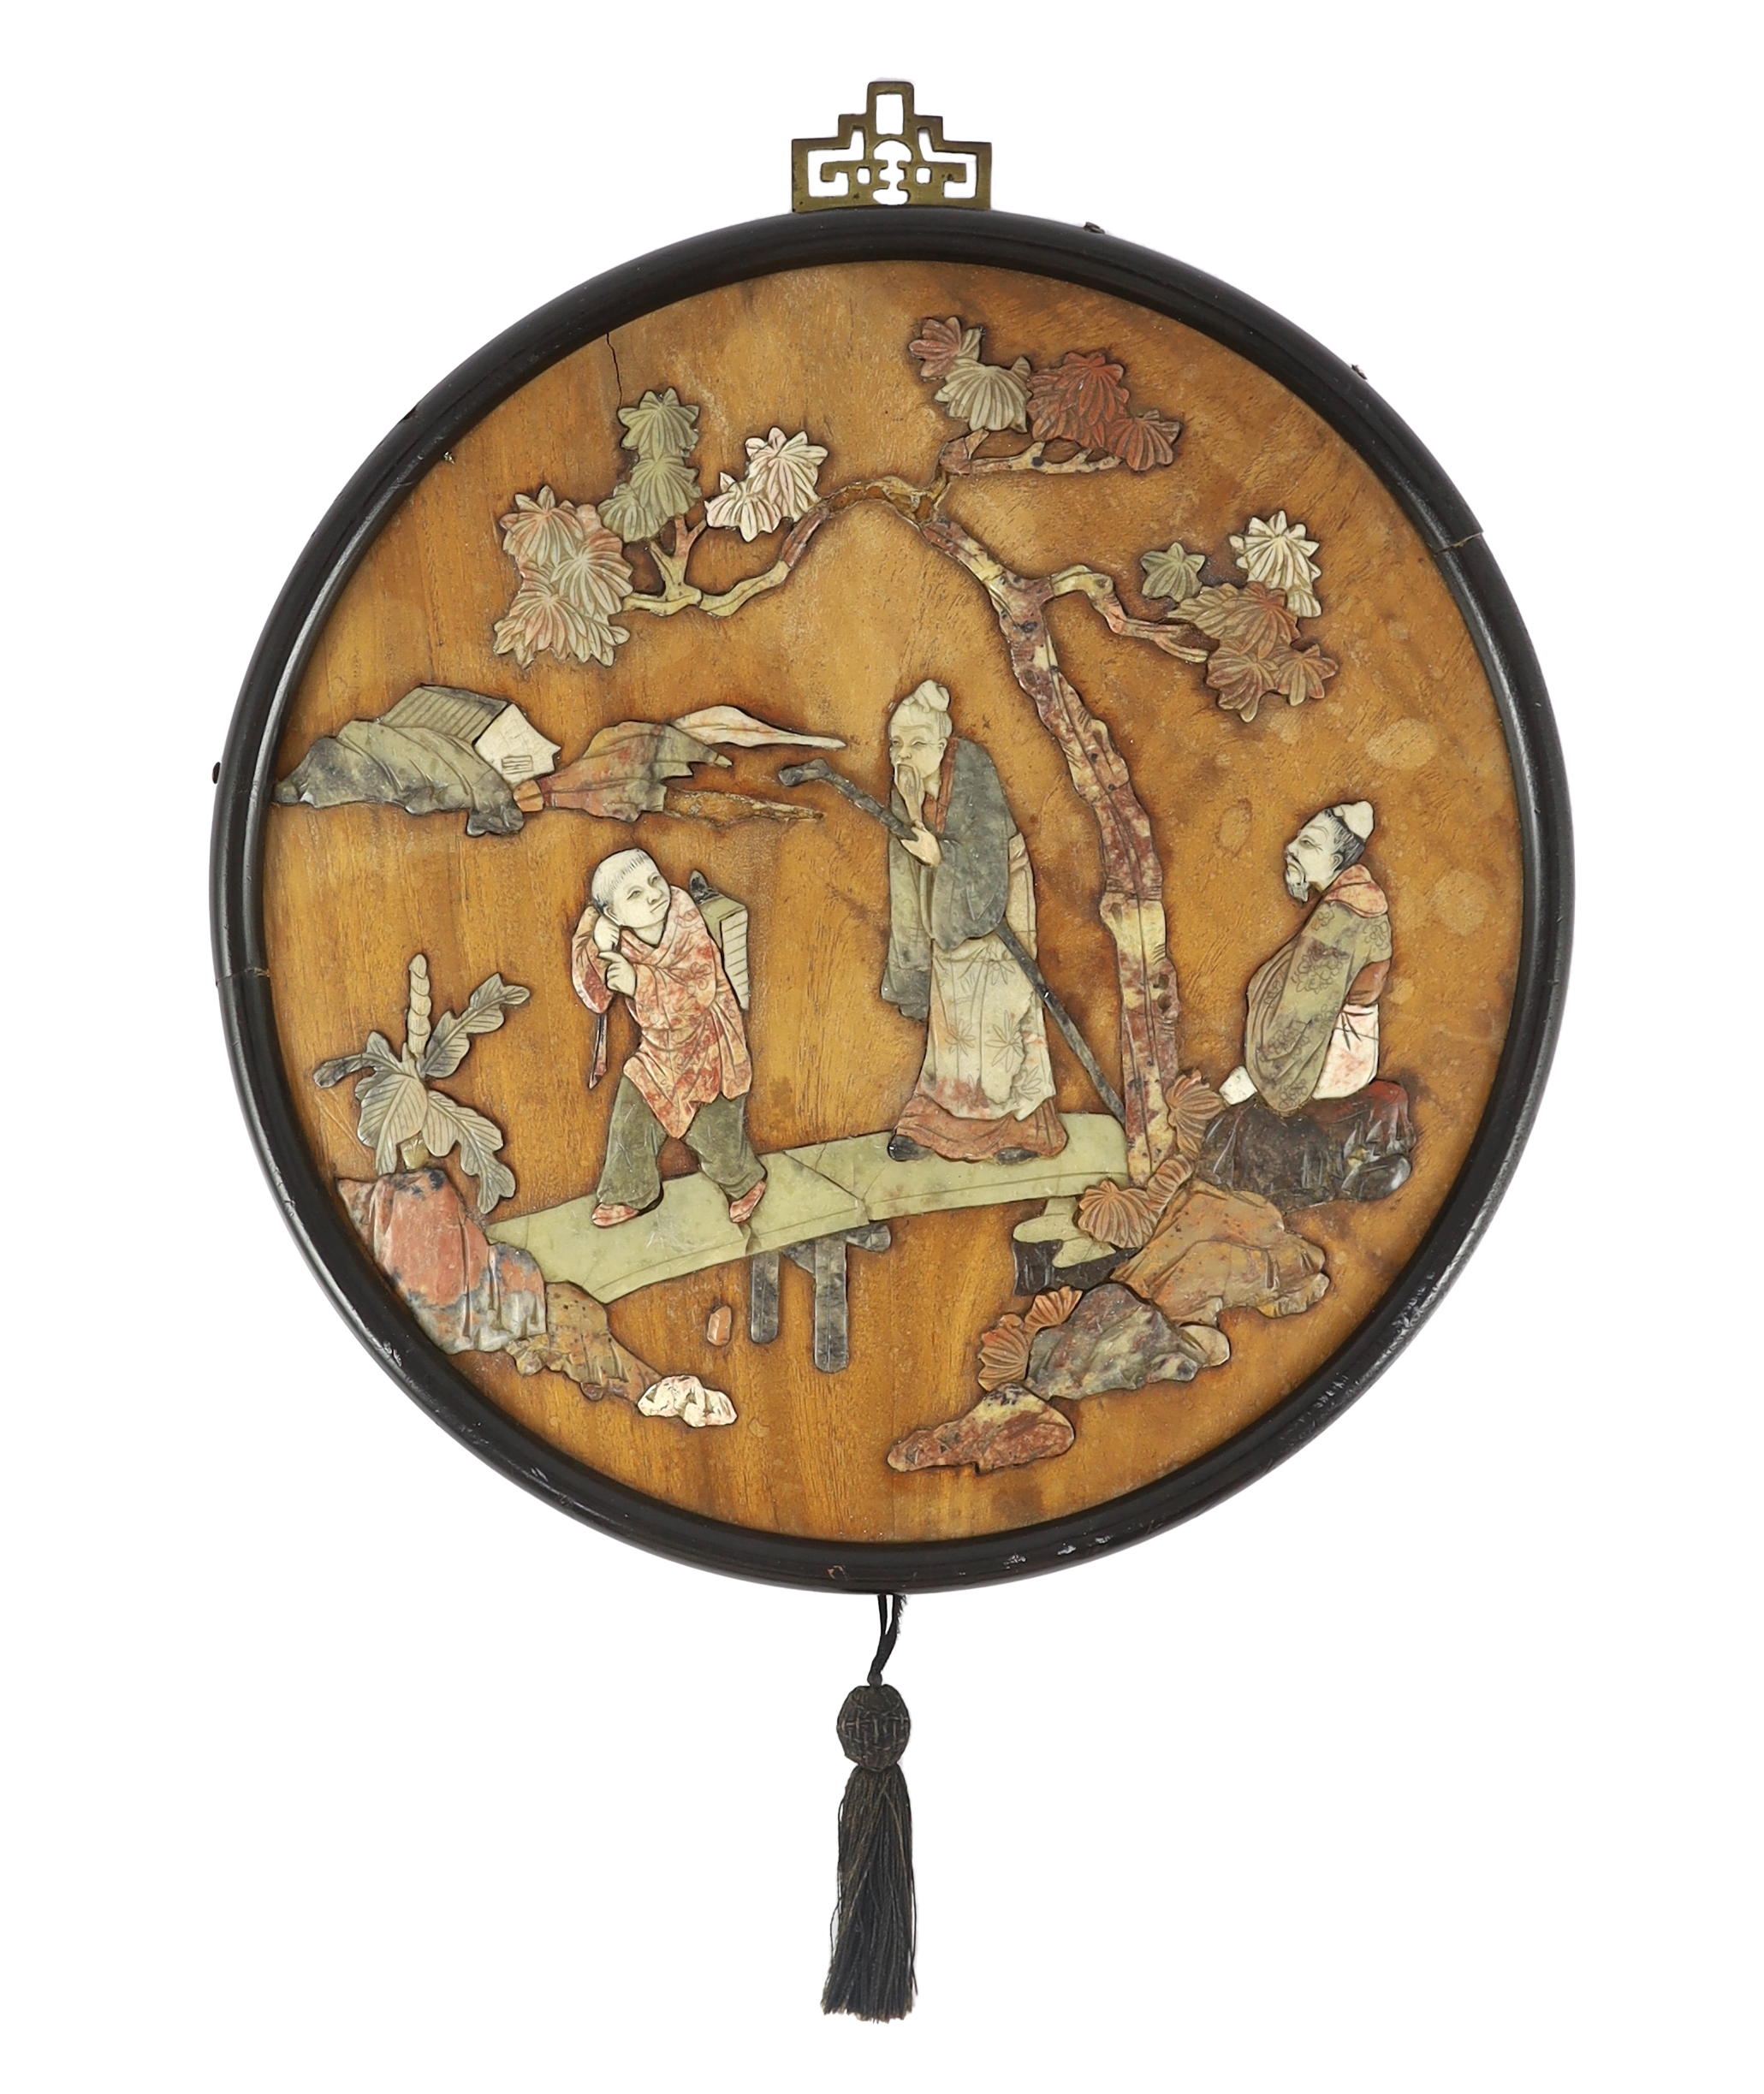 A Chinese wood and soapstone inlaid circular screen panel, late Qing dynasty                                                                                                                                                